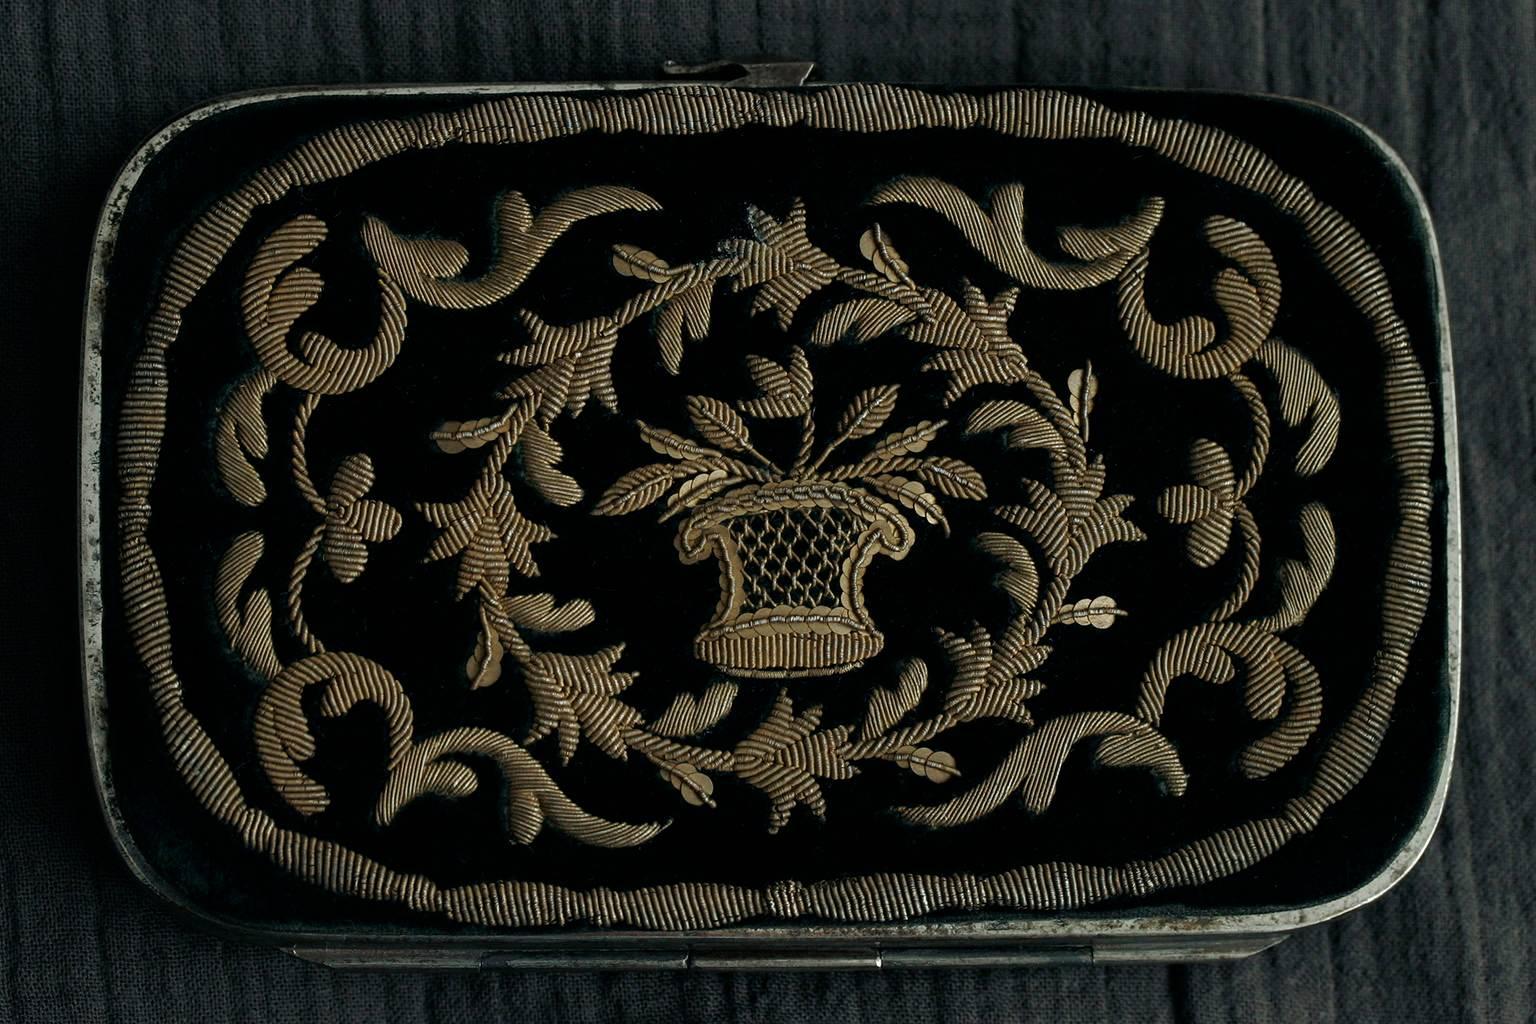 C.1870. A beautiful Victorian purse with hand-embroidered work. The dark green velvet is decorated with golden threads and beads. The purse has a metal frame with a snap closure placed at the top center. Inside, it contains a small notebook and a